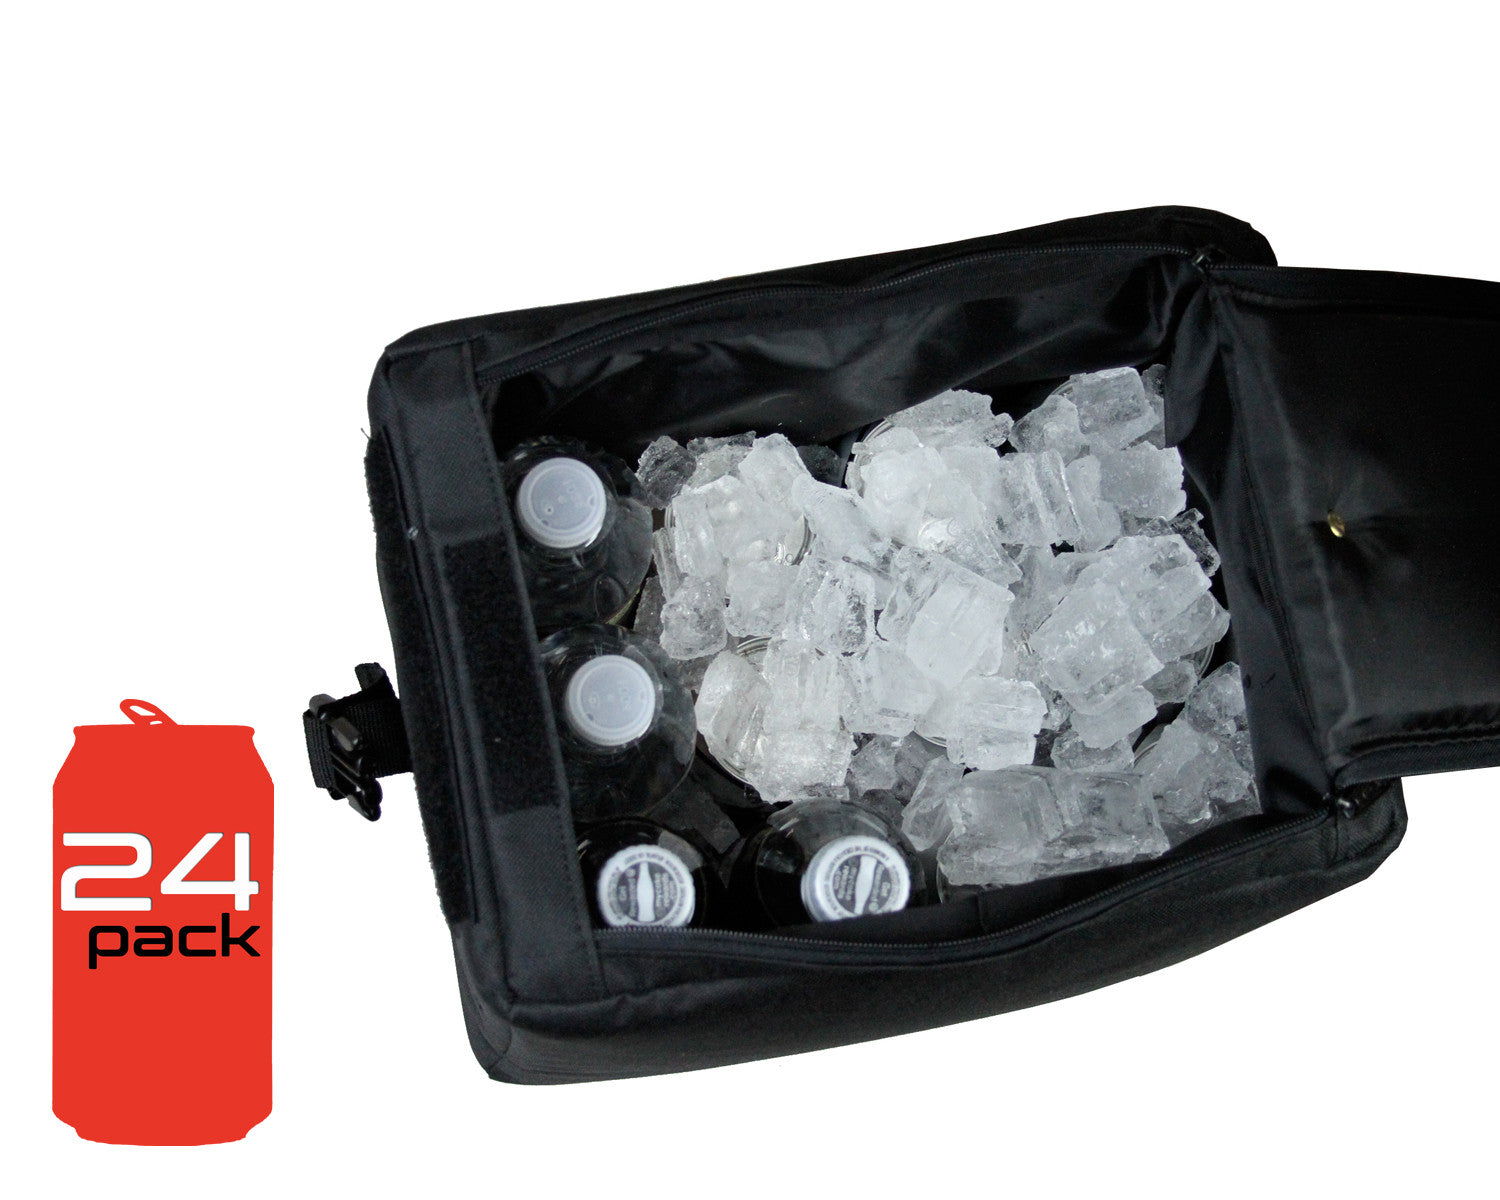 The 24-Pack Universal Cooler Bag - Fits Perfectly in Arch Series Bags